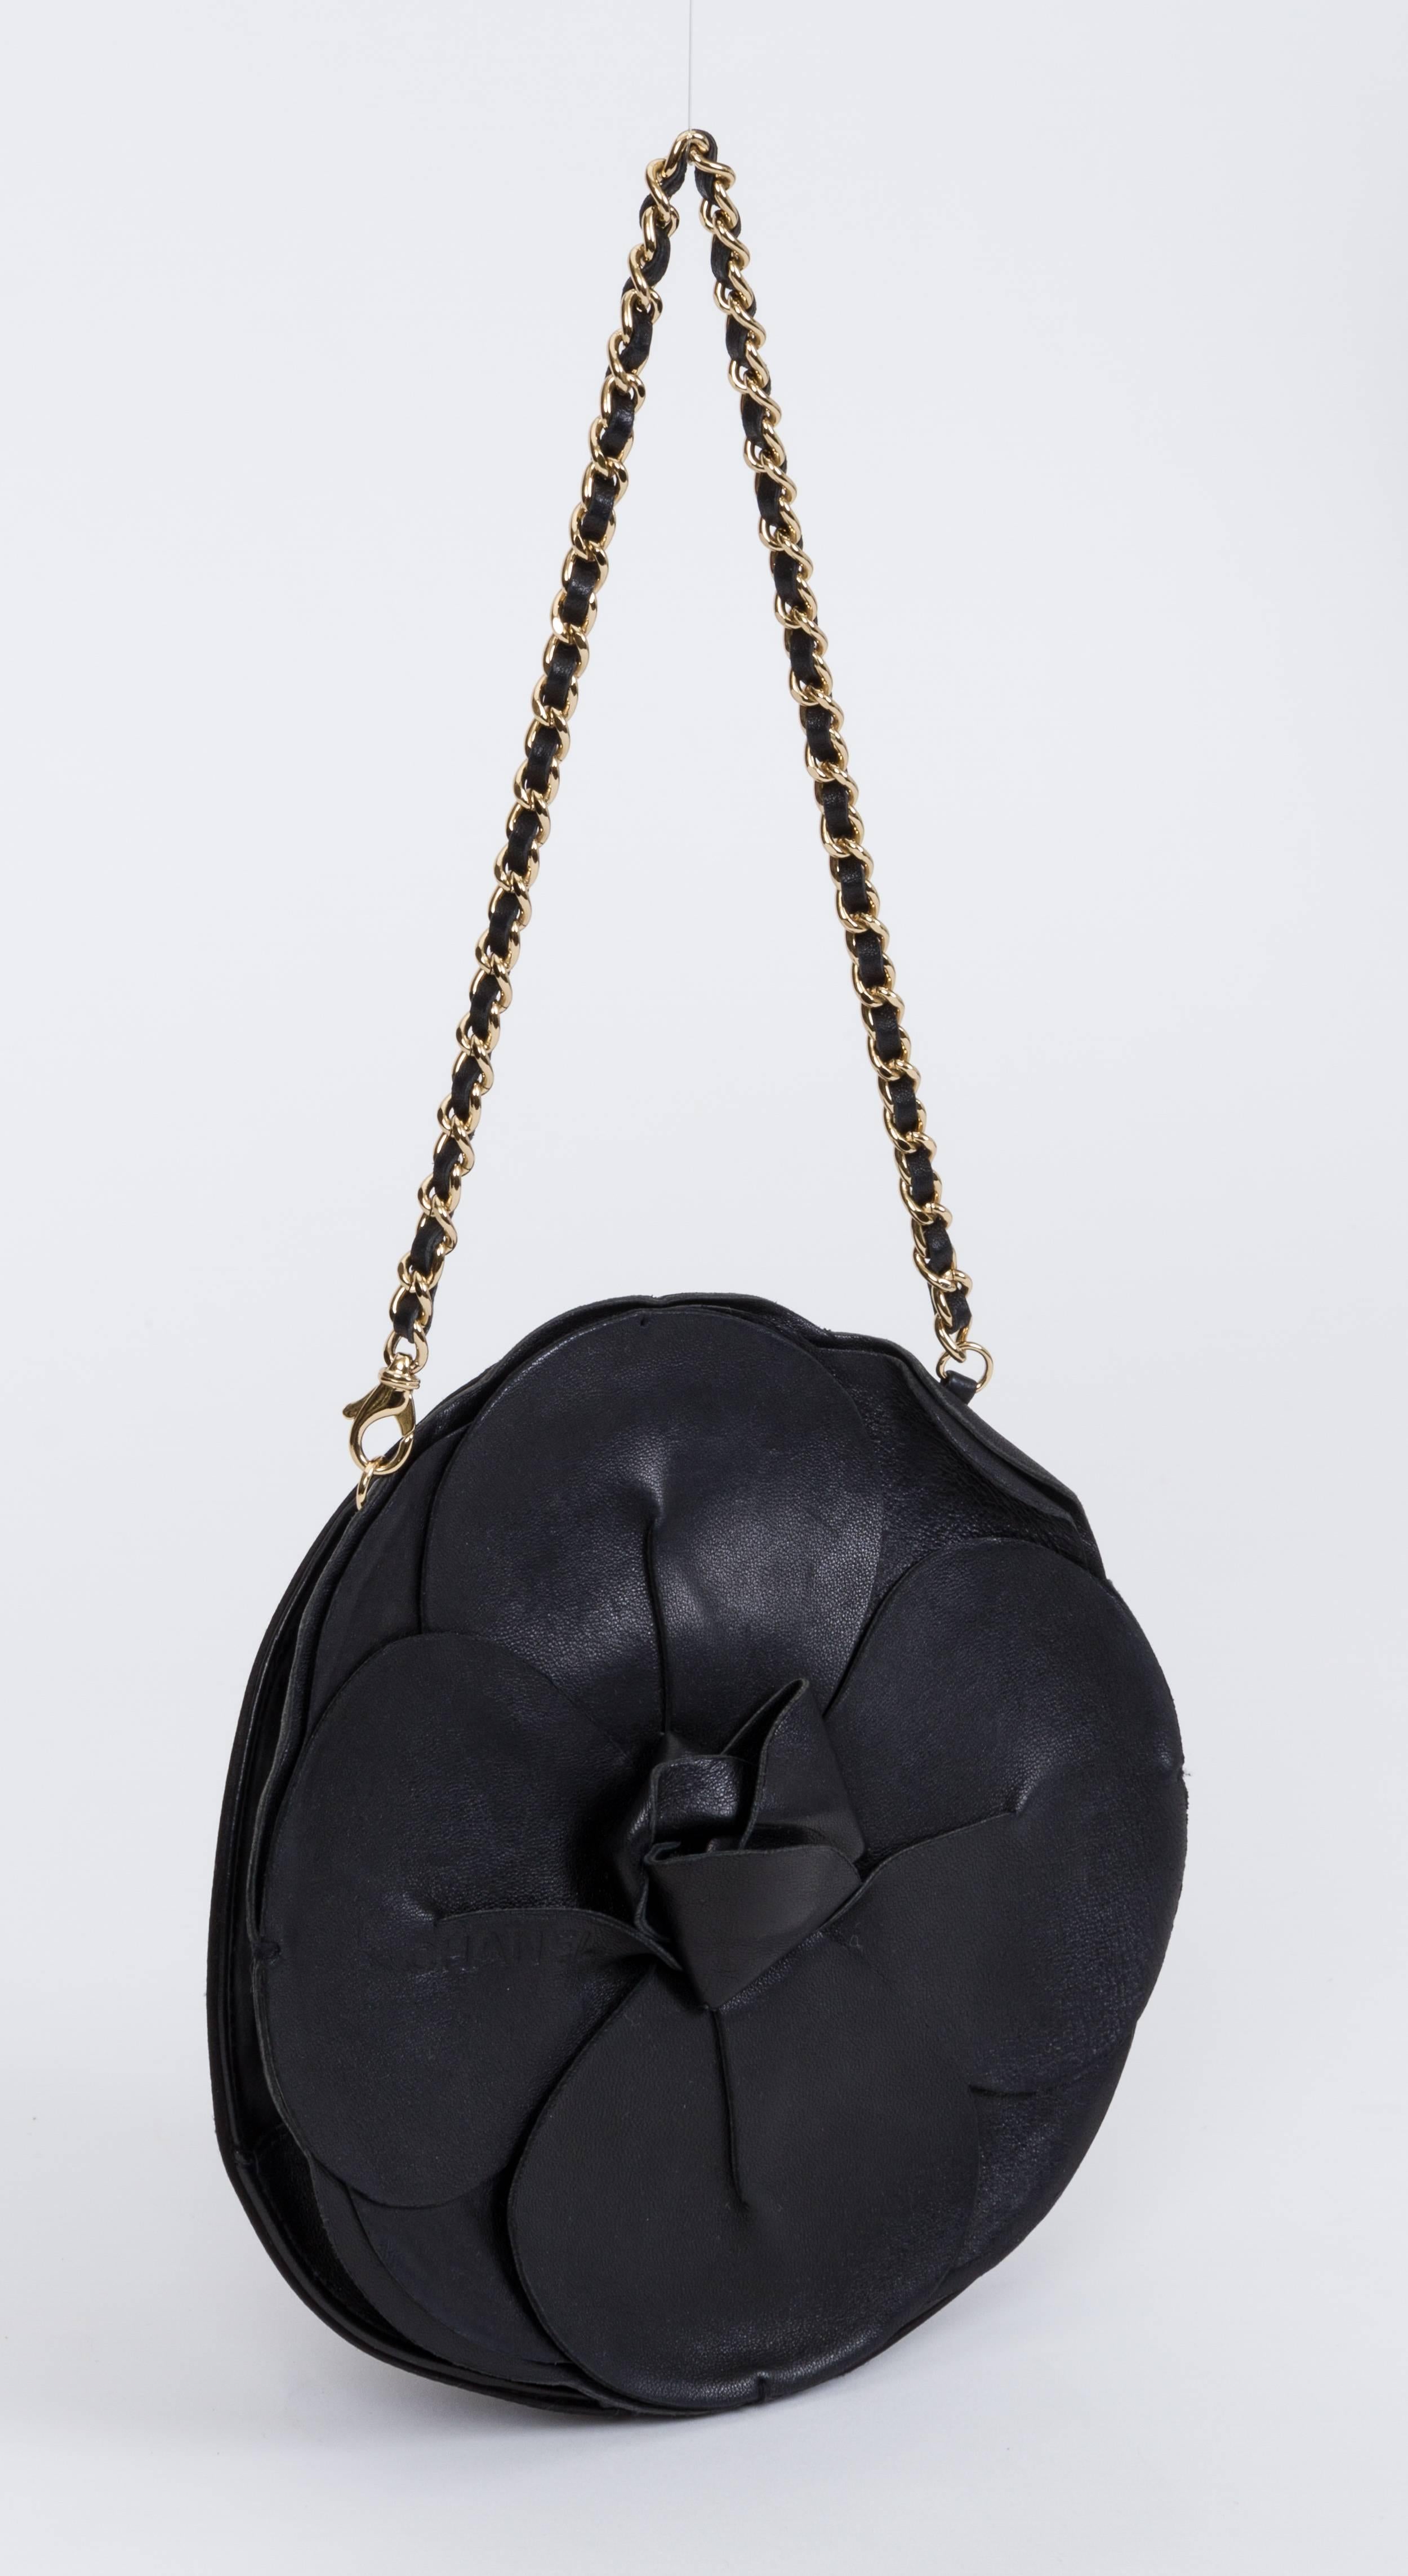 Chanel evening bag shaped as a camellia flower, black leather and black silk combination. Can be worn with or without the strap. Shoulder drop 7.5